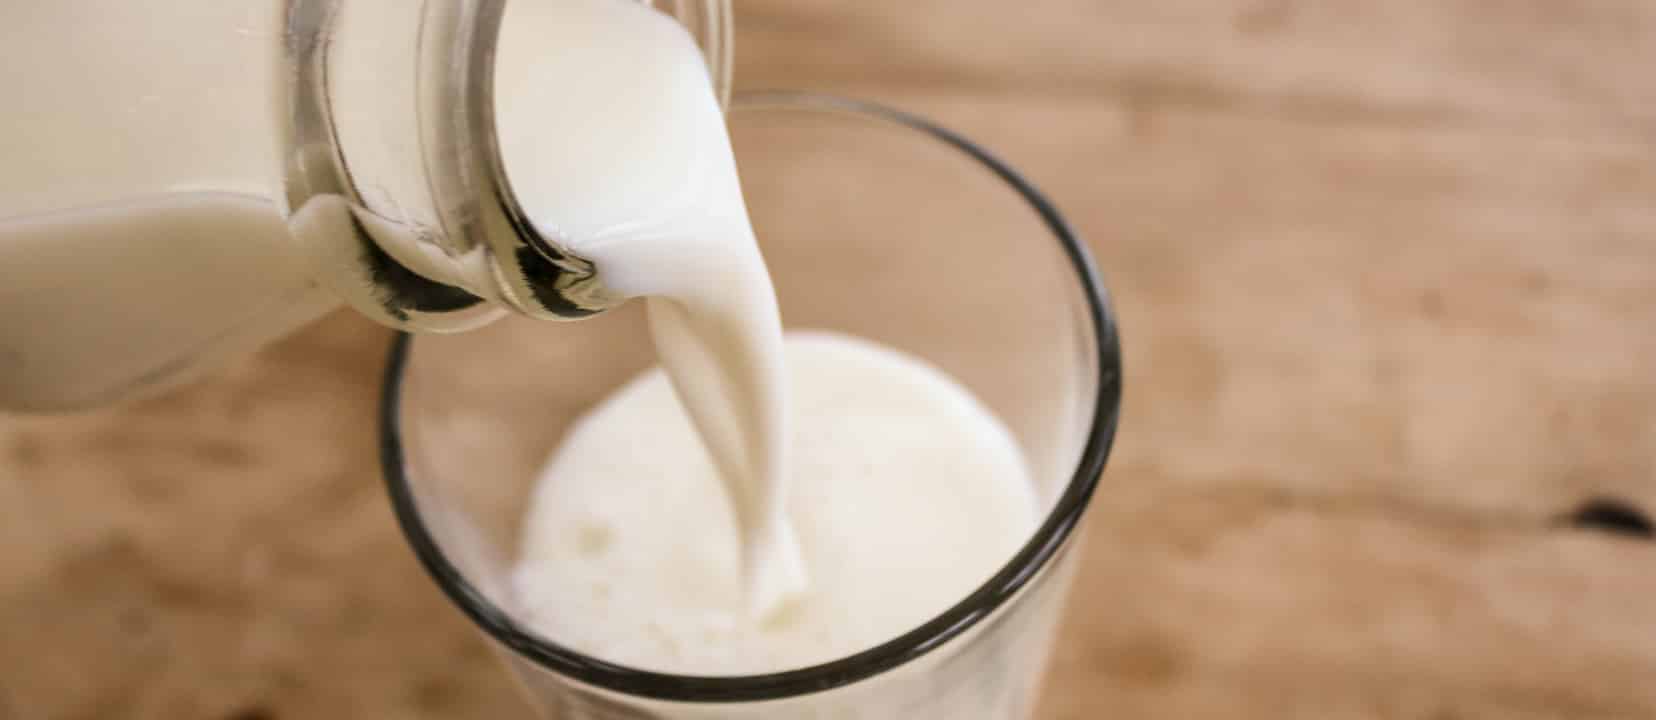 Why Is Milk Consumption Associated with More Bone Fractures?